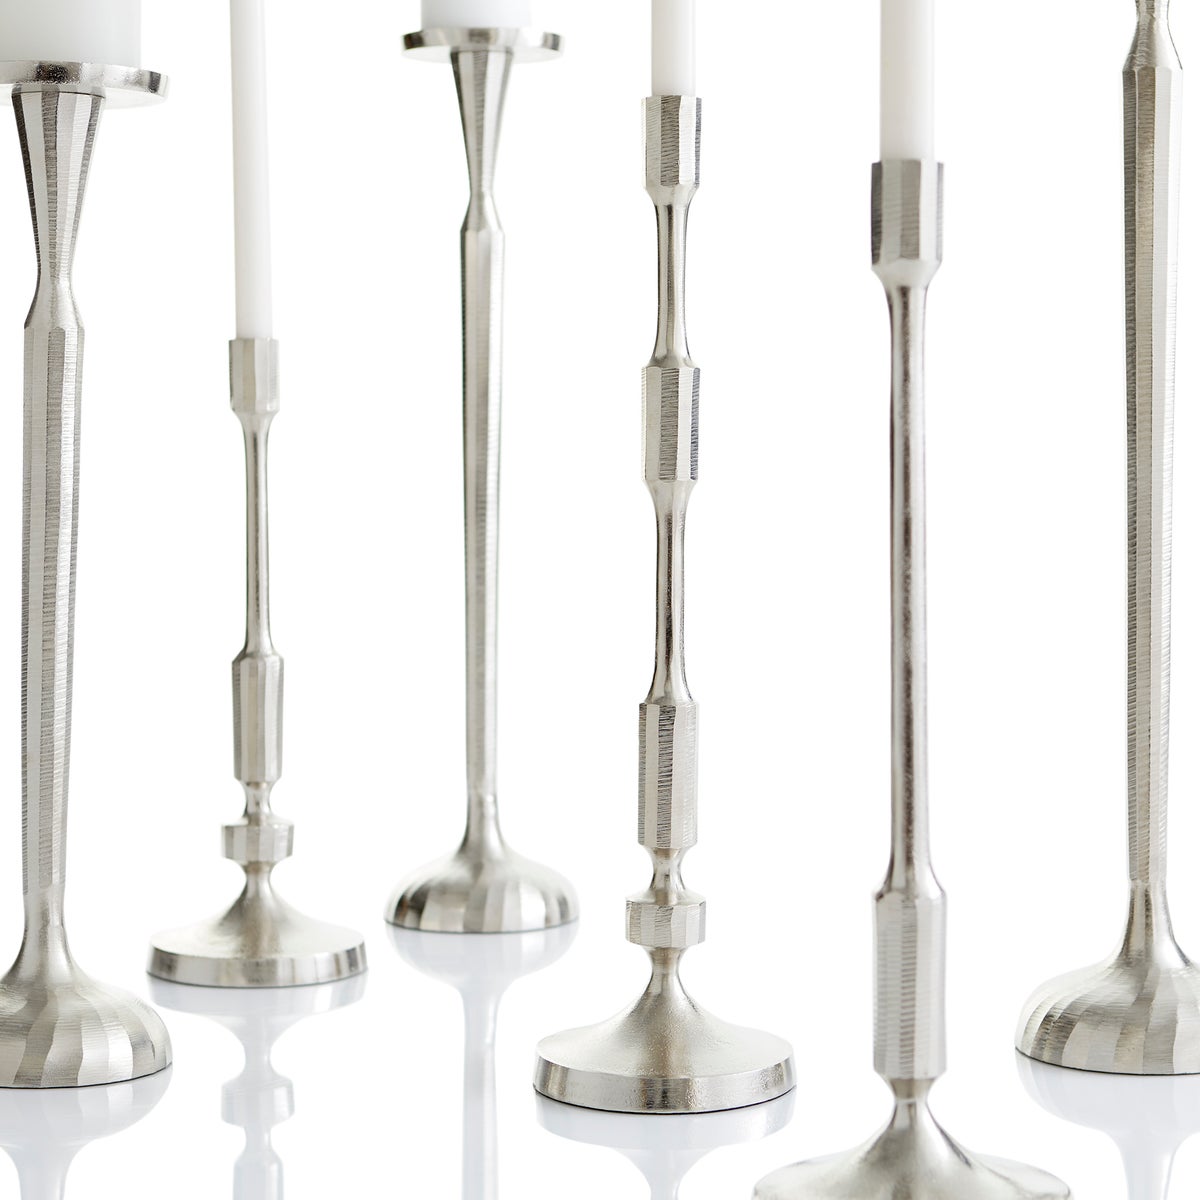 Cambria Candleholder | Nickel - Small